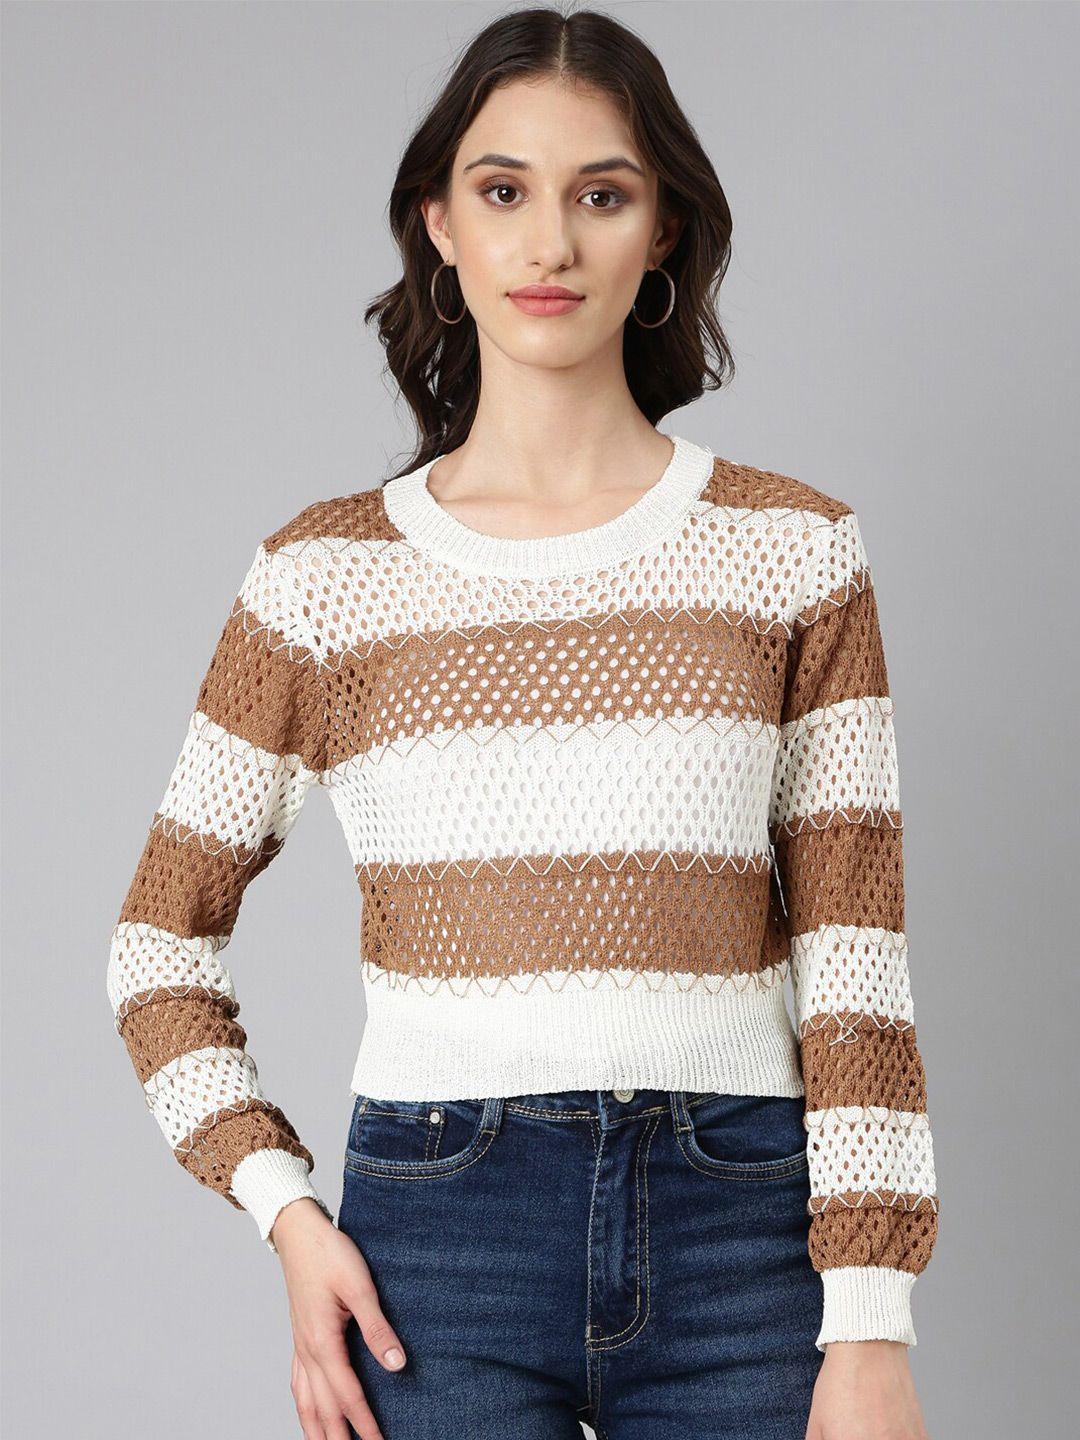 showoff striped long sleeves acrylic top